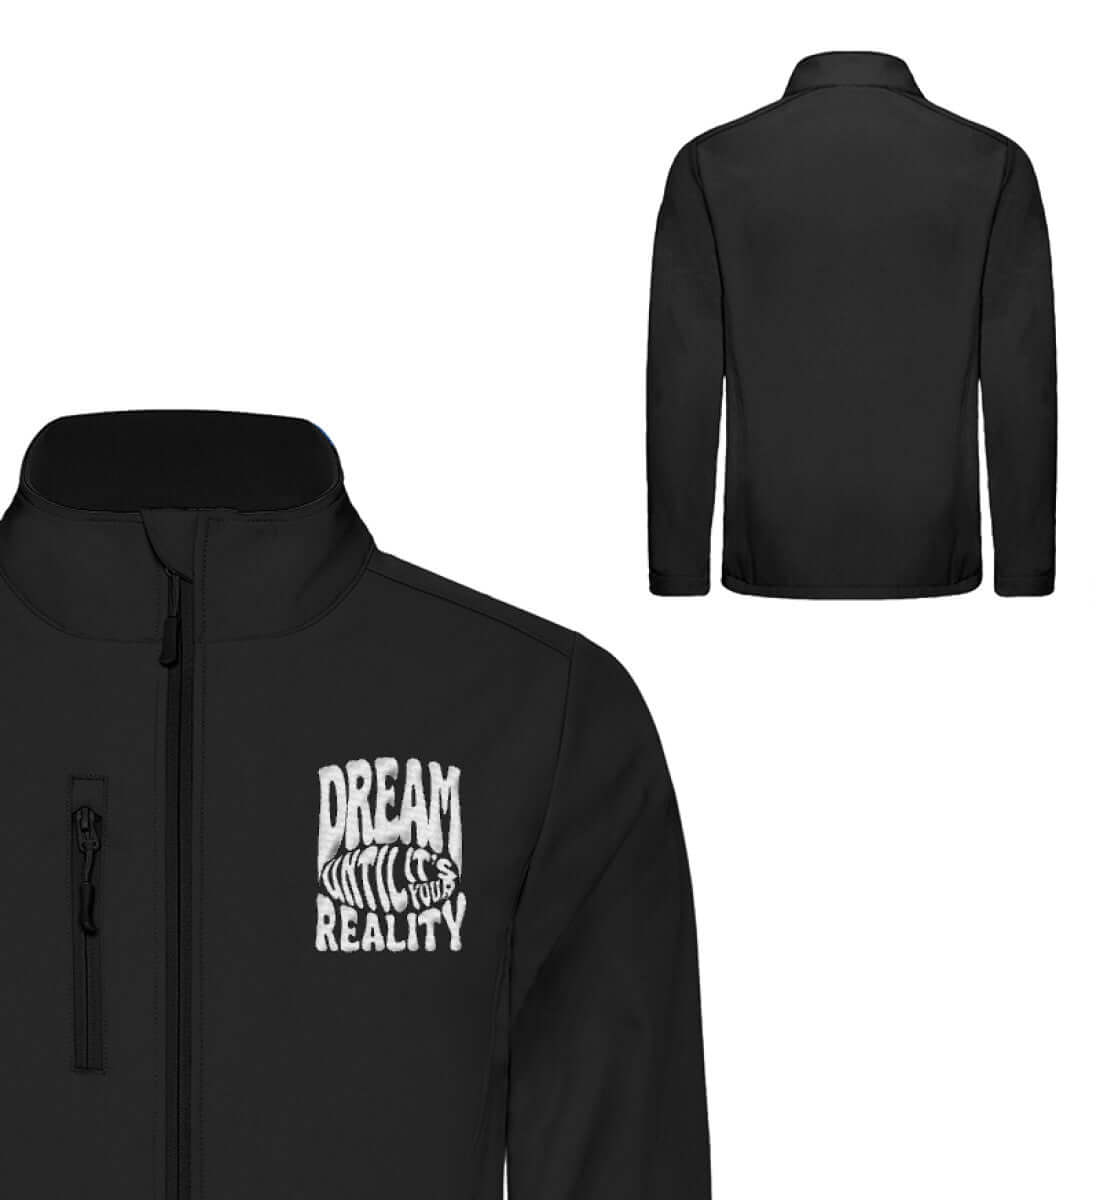 'DREAM UNTIL IT'S YOUR REALITY' UNISEX SOFTSHELL JACKET - GODVIBES